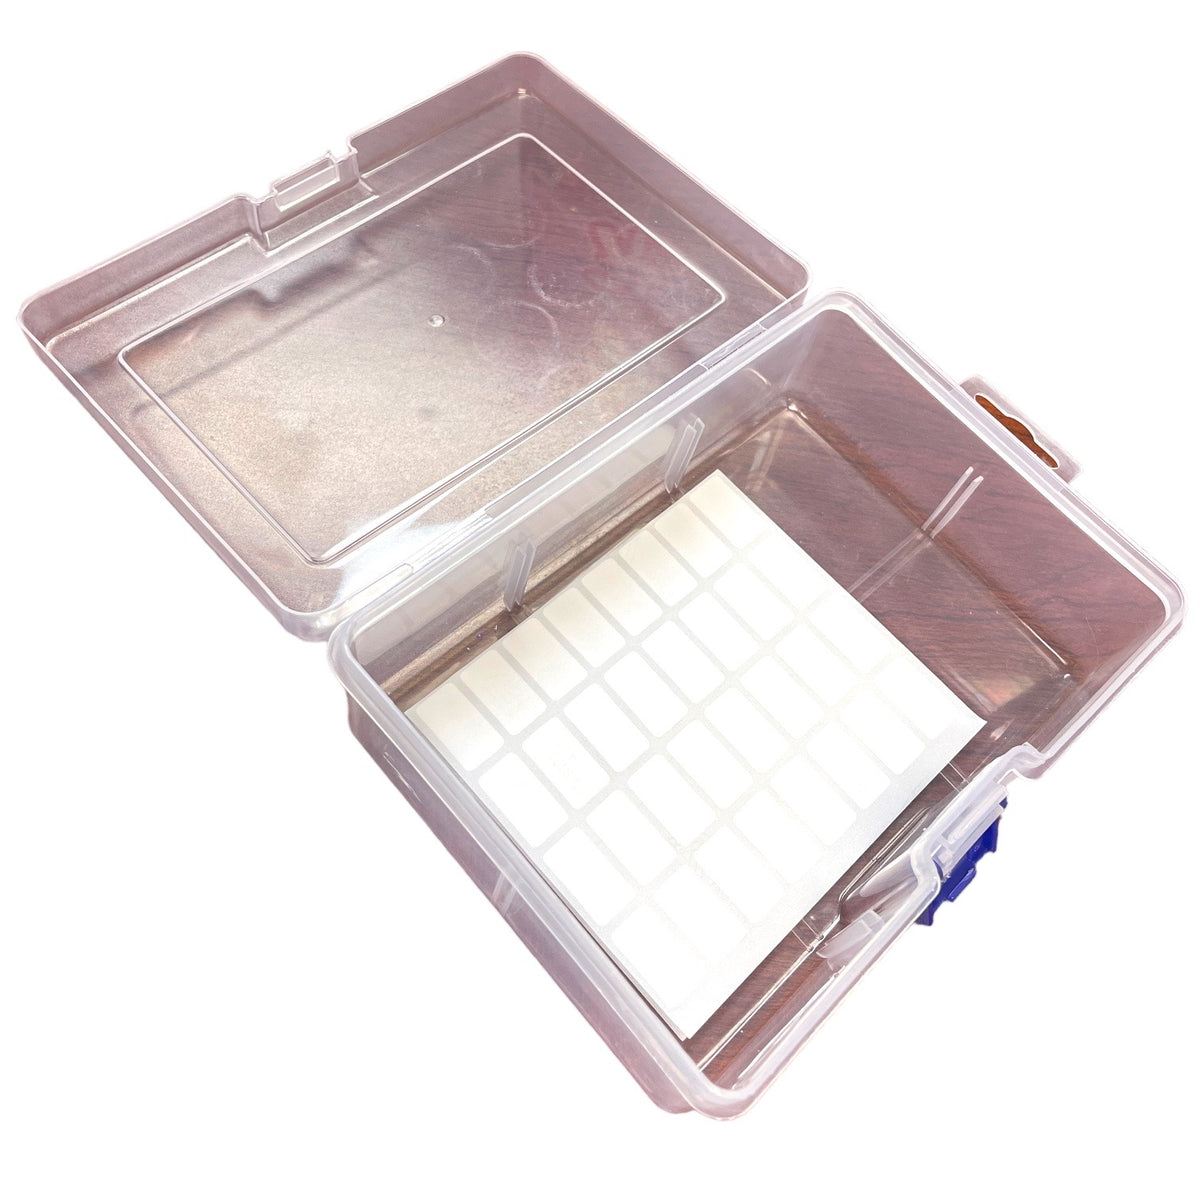 Claynation 24 Clay Kit with FREE Tube Compartment Container